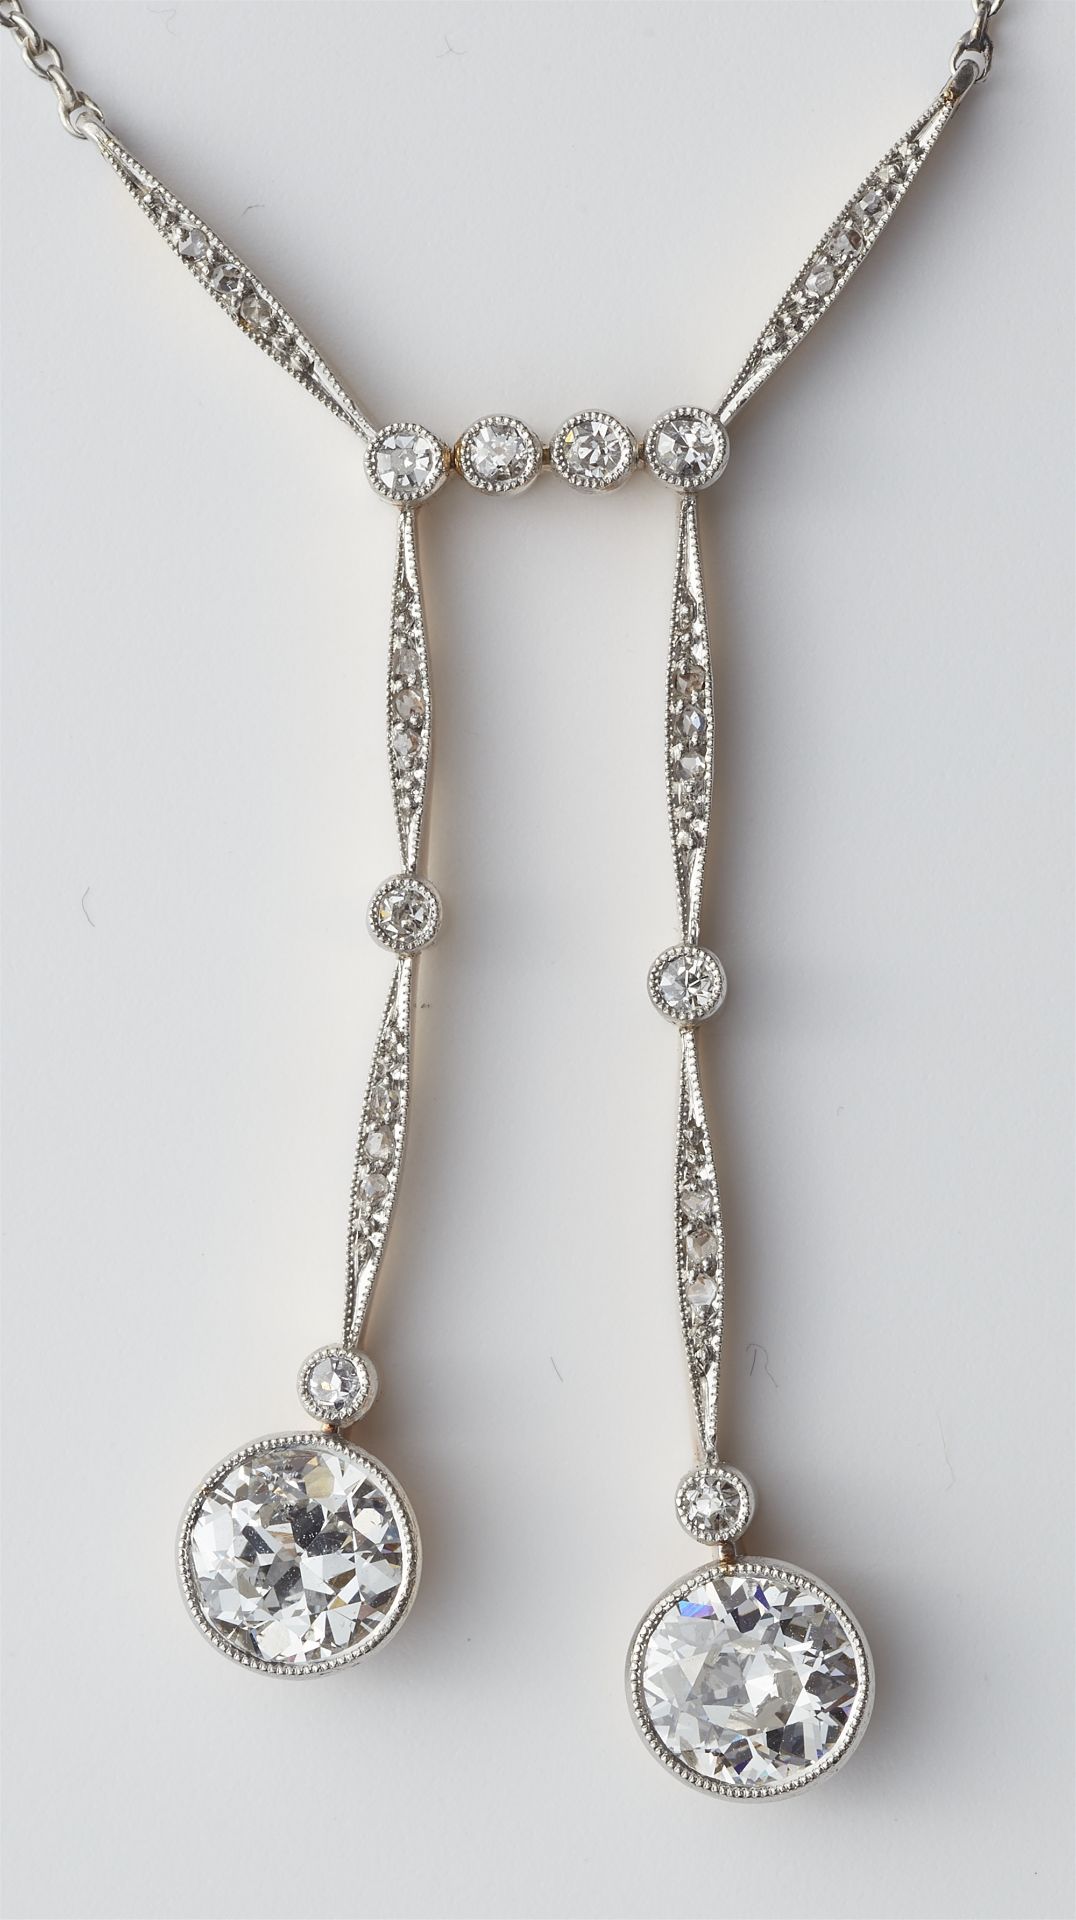 A 14k gold diamond negligé pendant necklace with two transitional-cut diamond solitaires. - Image 2 of 4